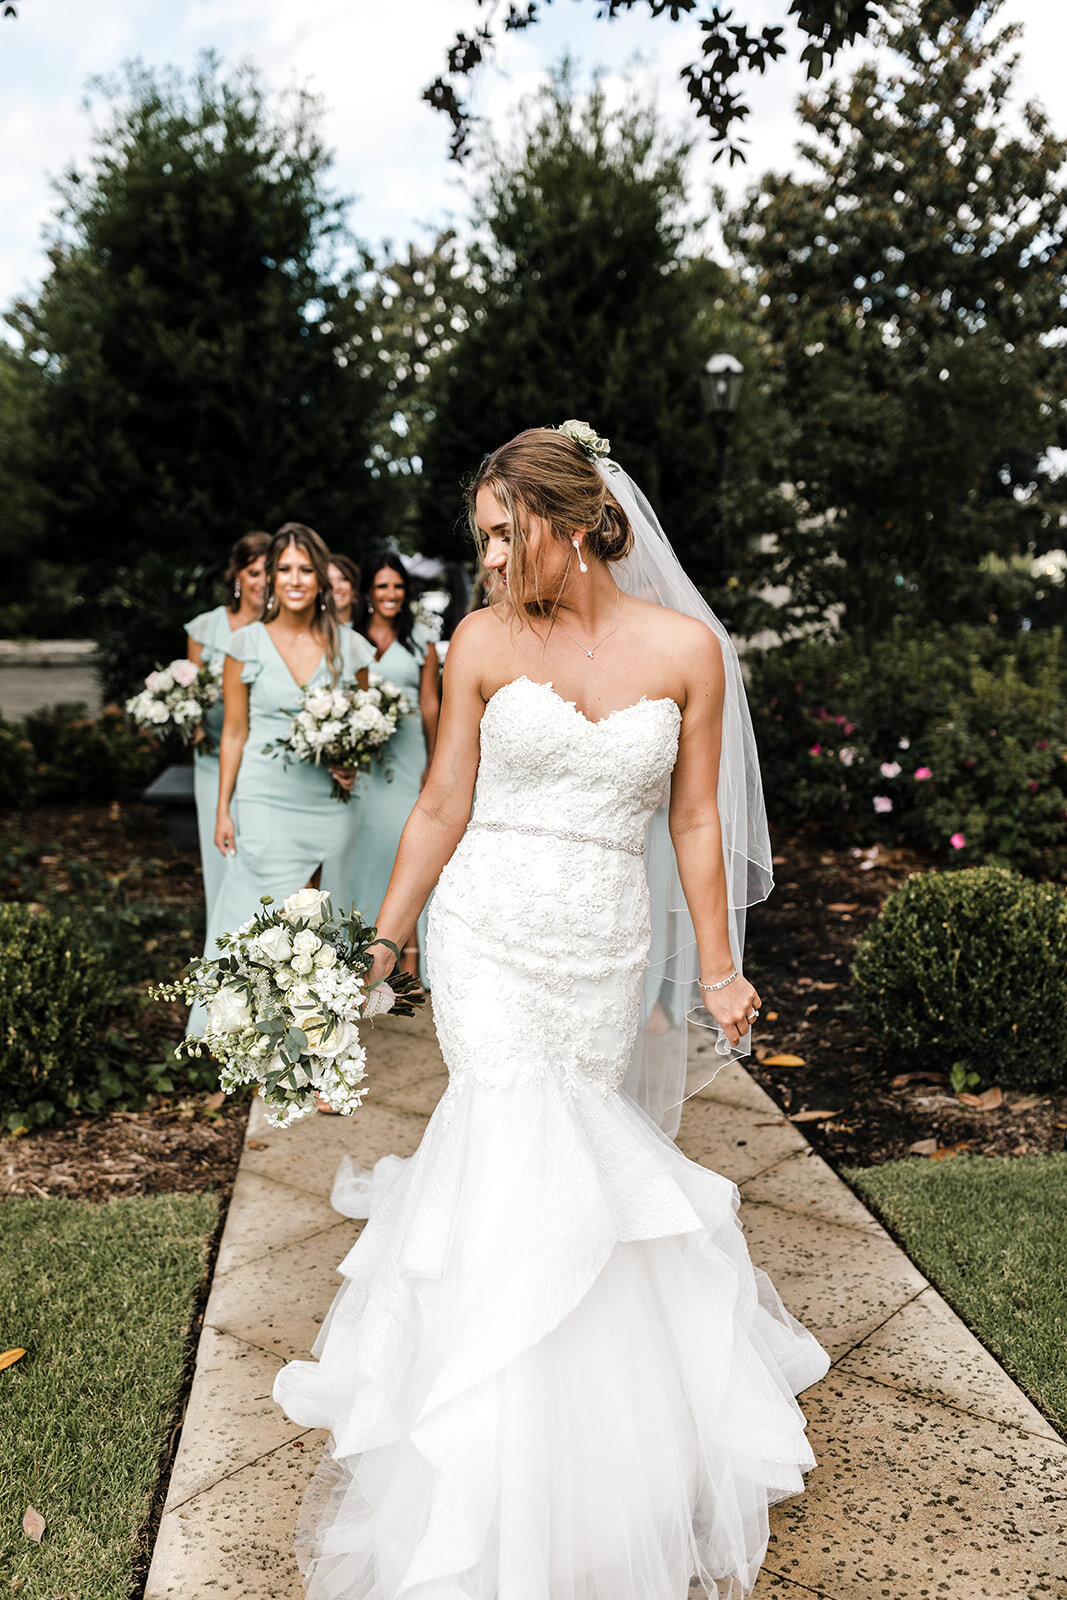 ivory-and-bride-down-for-the-gown-cassie-real-bride-wedding-dress-maggie-sottero-blog-bridal-blog-wedding-dress-mermaid-bridal-gown-wedding-gown-bridal-shop-bridal-boutique-bridal-shopping-bridal-style-savannah-georgia-GMP504-183-2.jpg